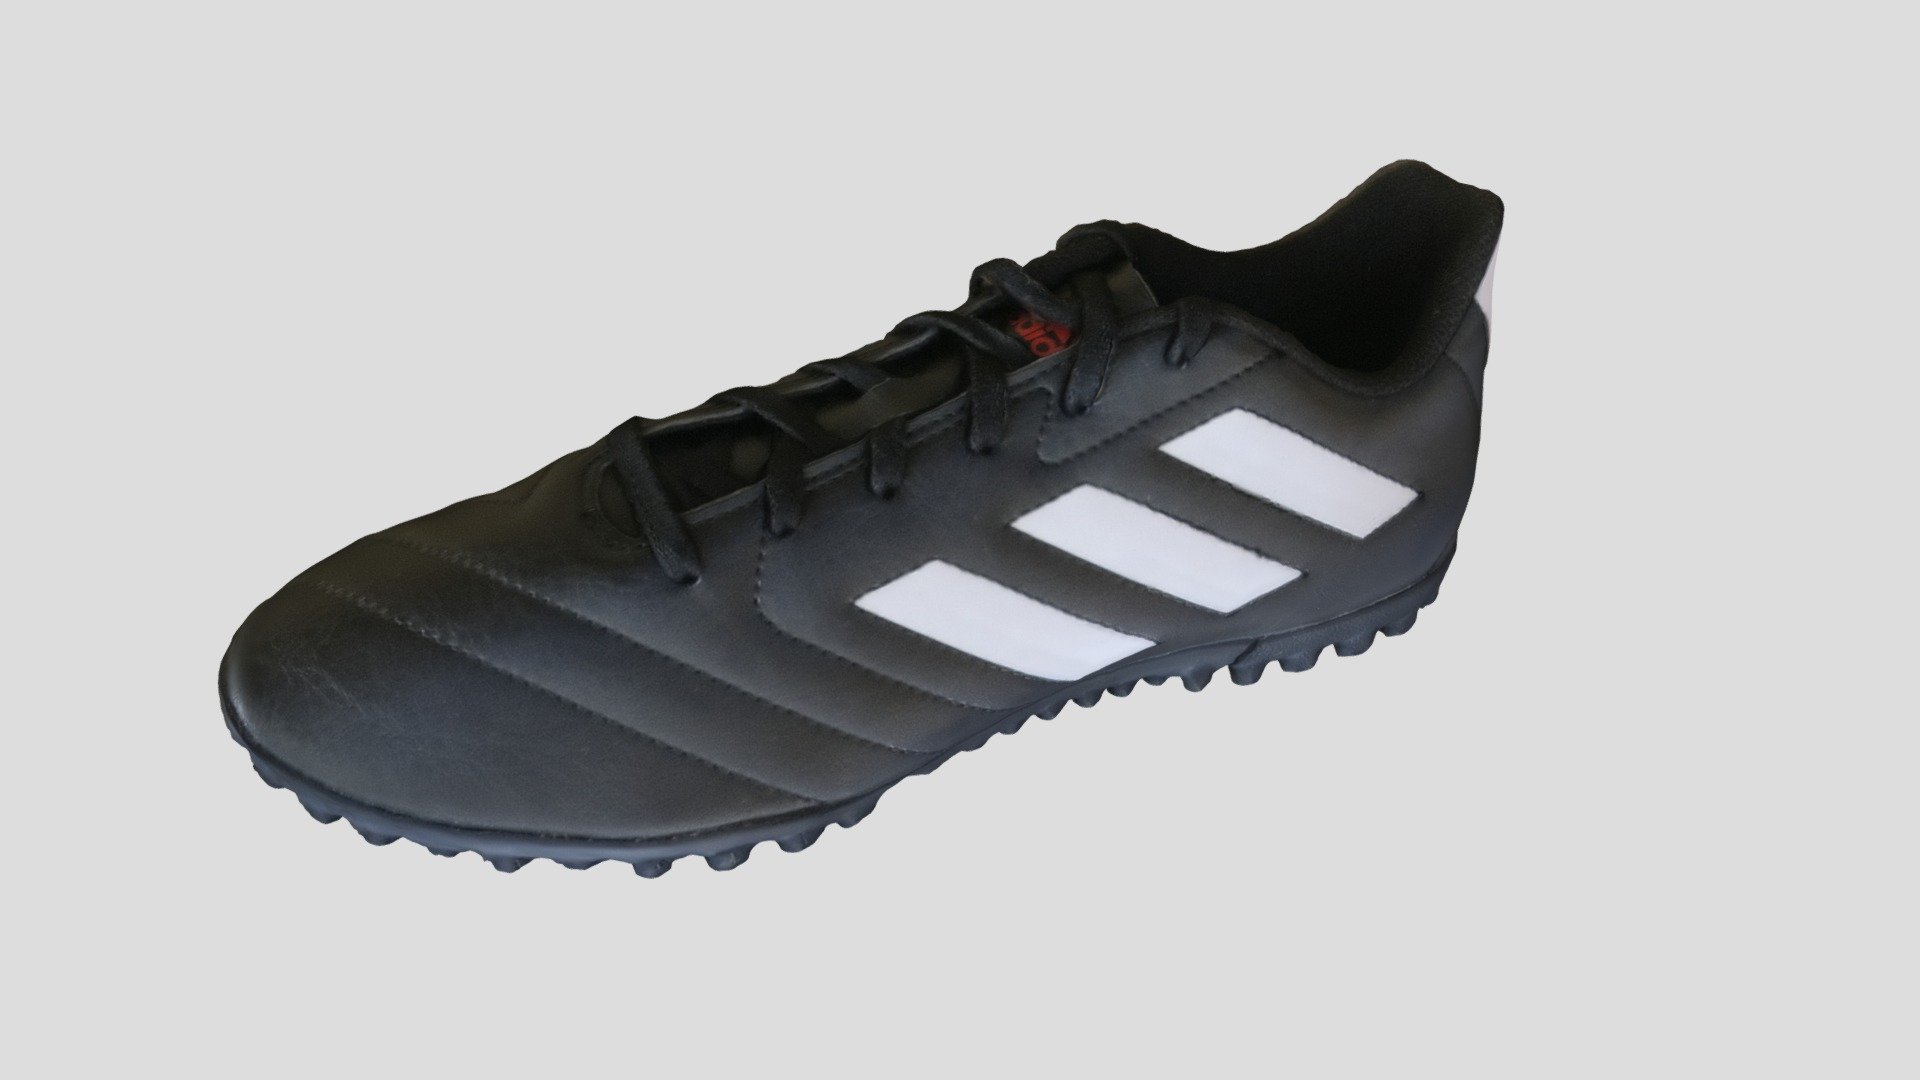 Adidas Goletto turf soccer (football) shoe. 
Scaled to realistic size.
Additional formats available:  3ds, dae, fbx, obj (with mtl), ply, stl, with jpeg texture 3d model